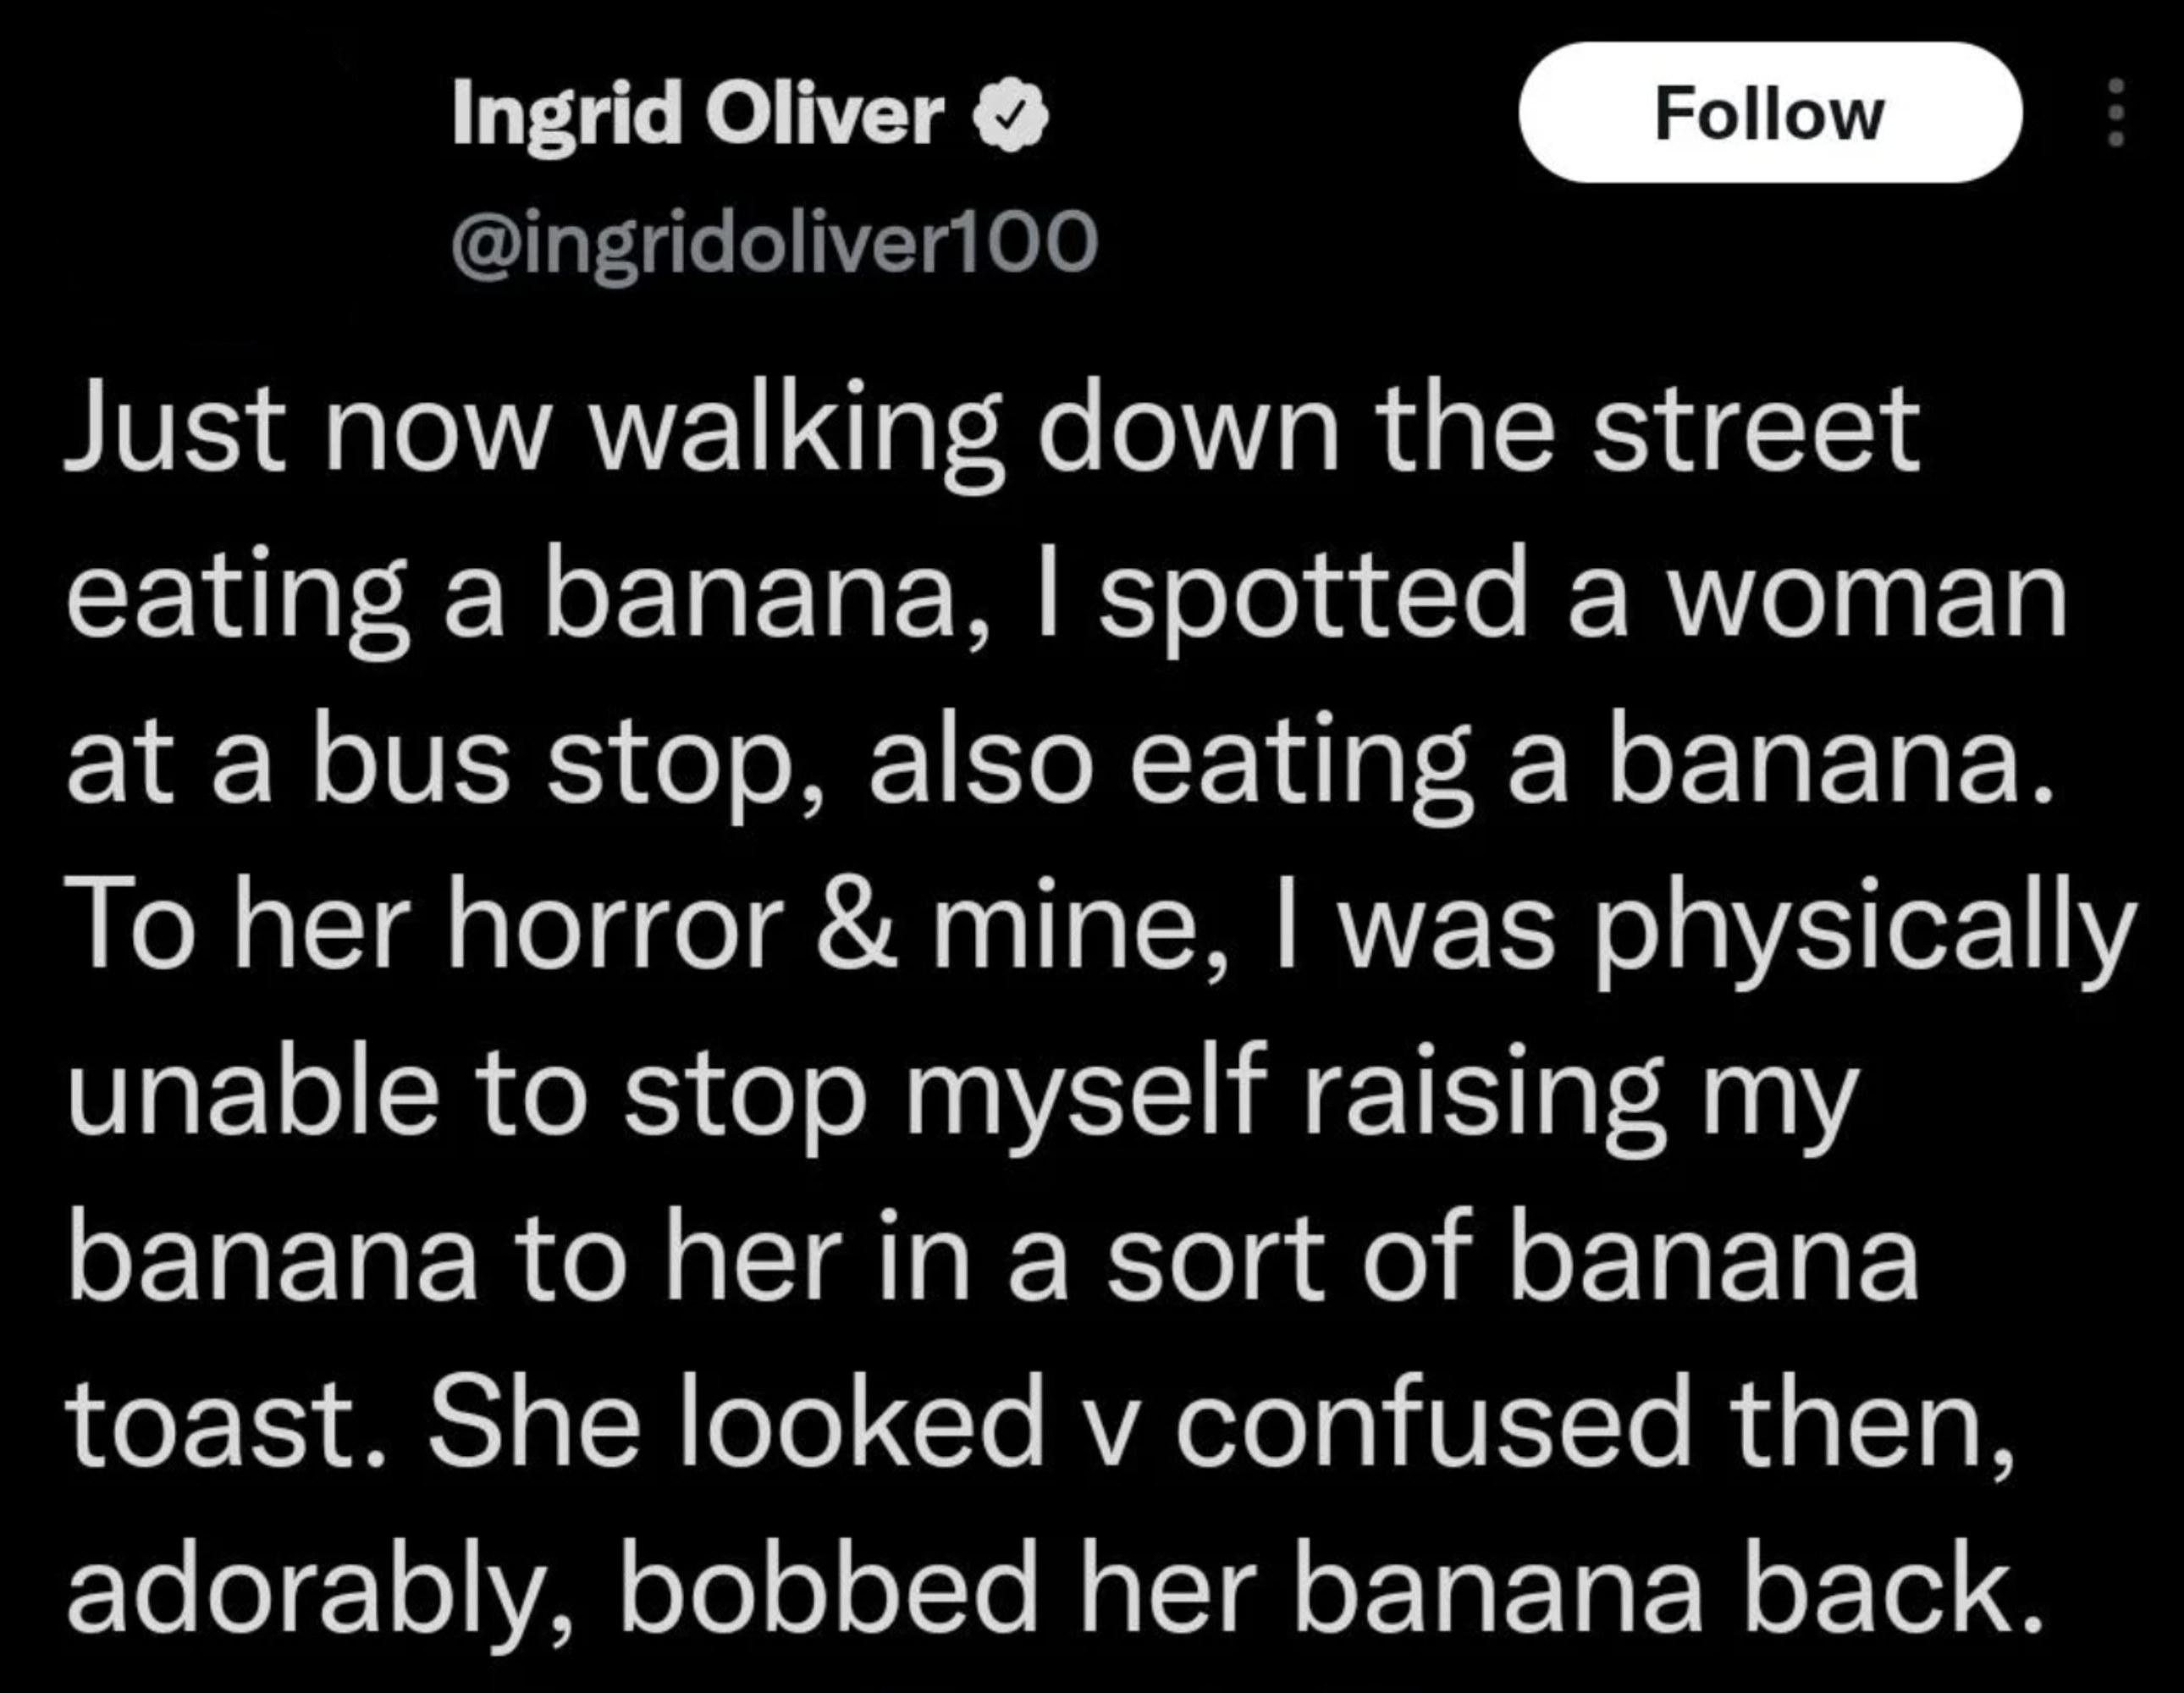 A woman eating a banana spotted a woman at a bus stop also eating a banana, and as she was raising her banana, they looked at each other; the other woman, thinking it was a &quot;banana toast,&quot; looked confused and then raised her banana back